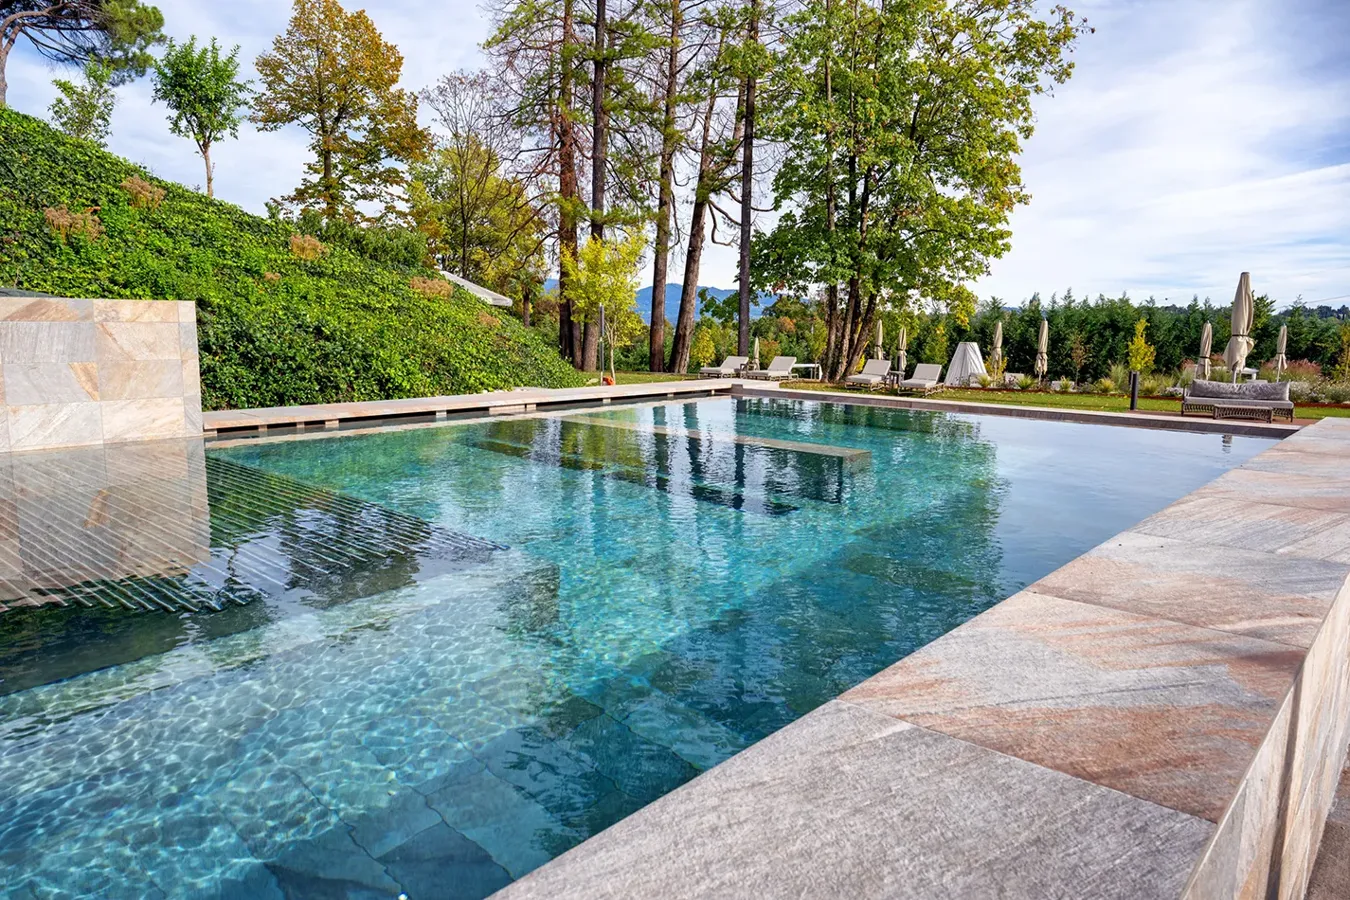 Pool featuring Limes Quartz Multicolor stone-effect anti-slip tiles in an outdoor setting.